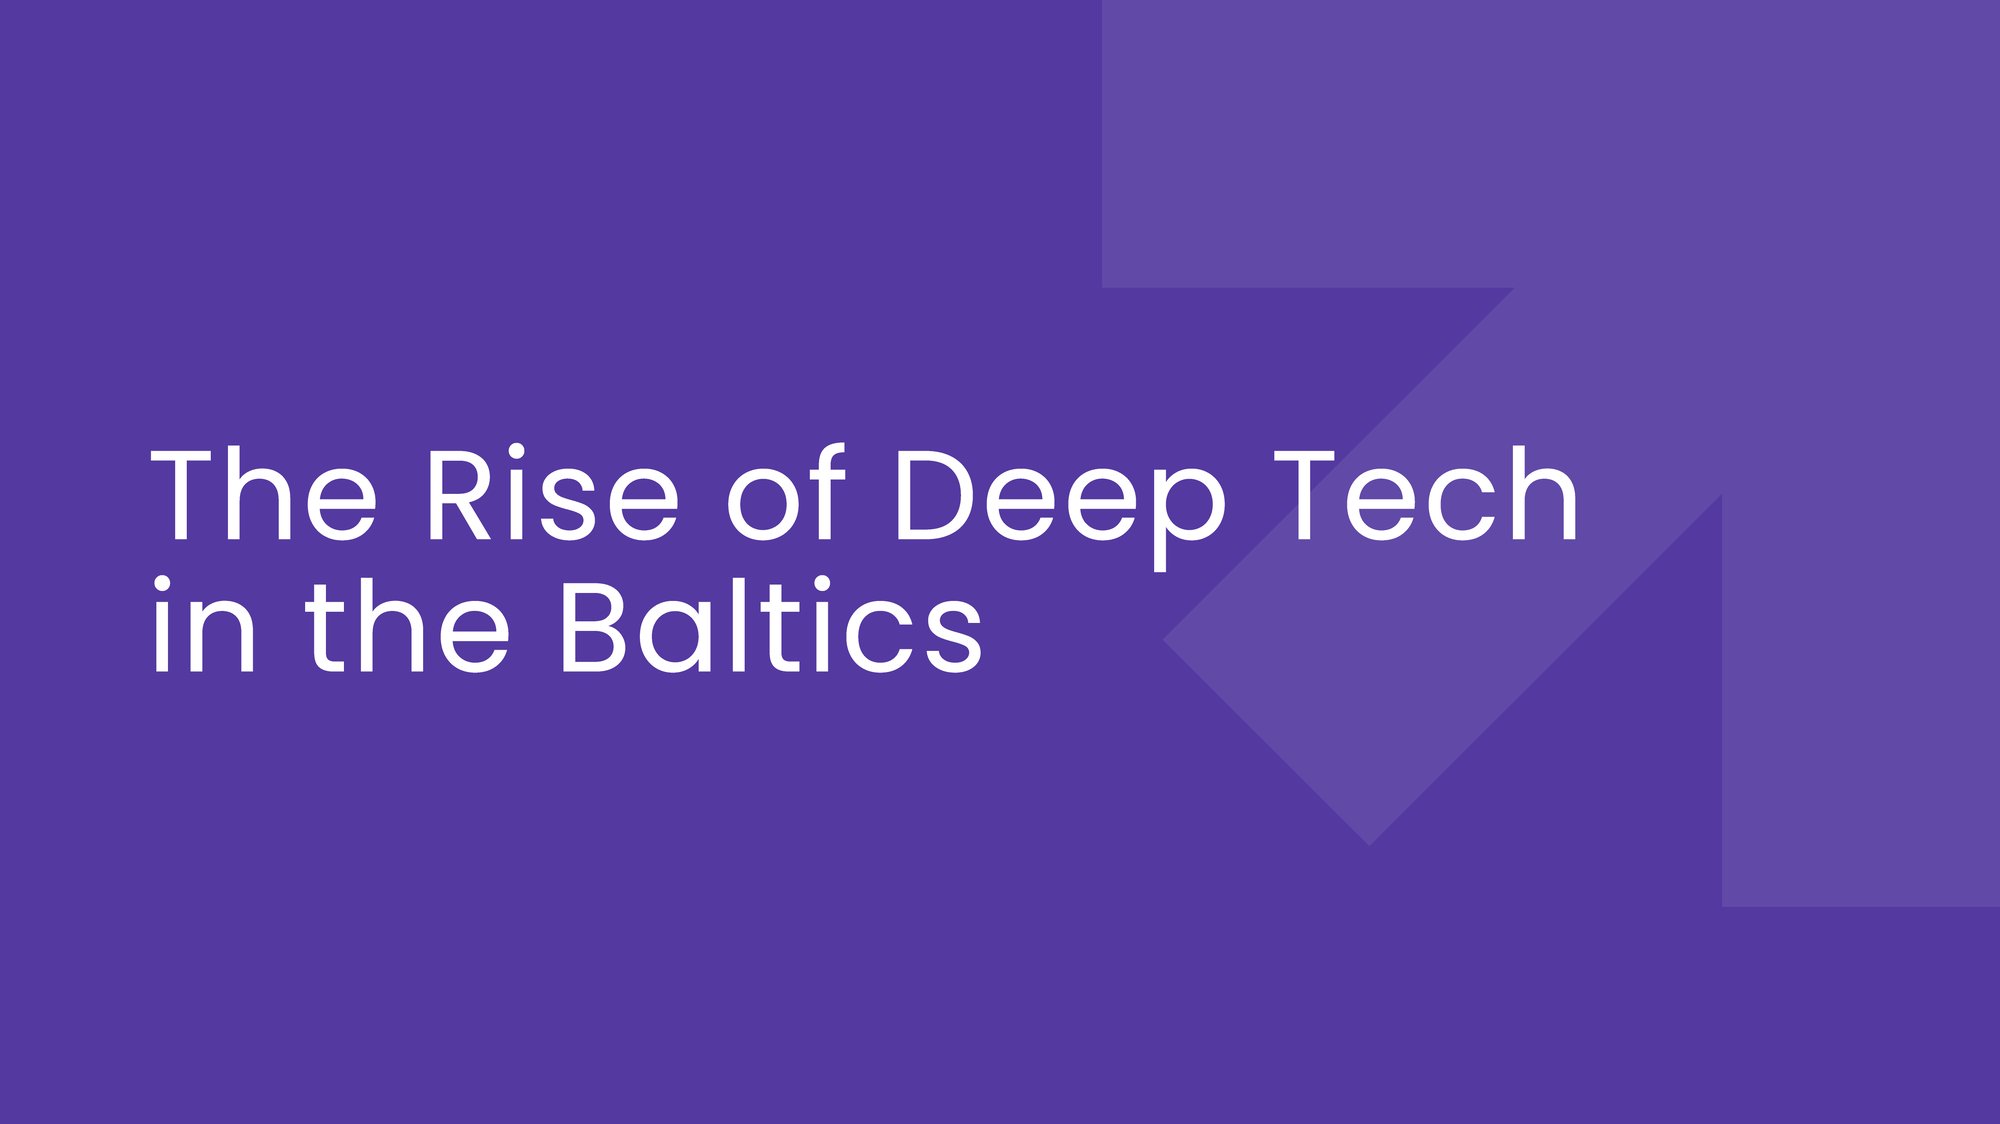 The Rise of Deep Tech in the Baltics